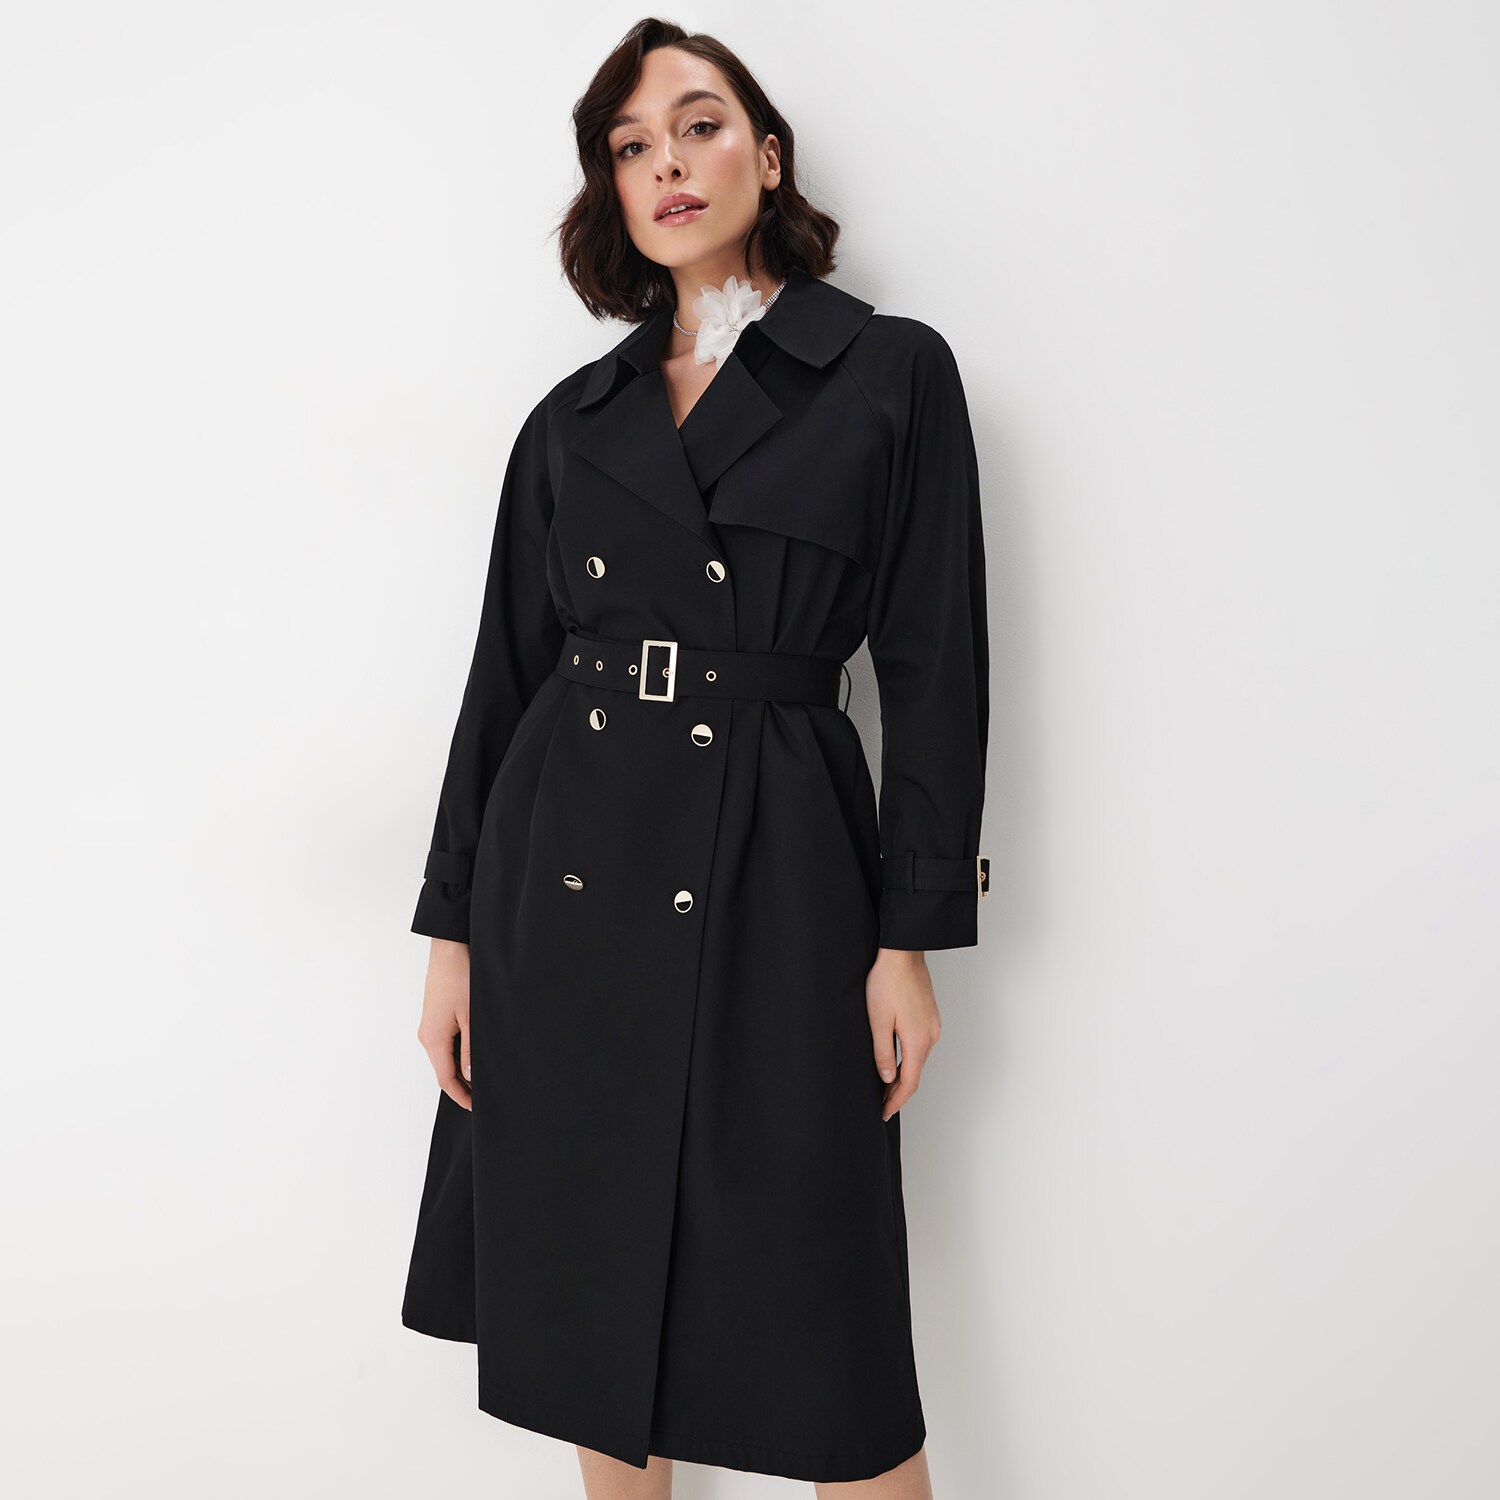 Mohito – Trench elegant cu curea – Negru All > outerwear > spring jackets 2023-10-04